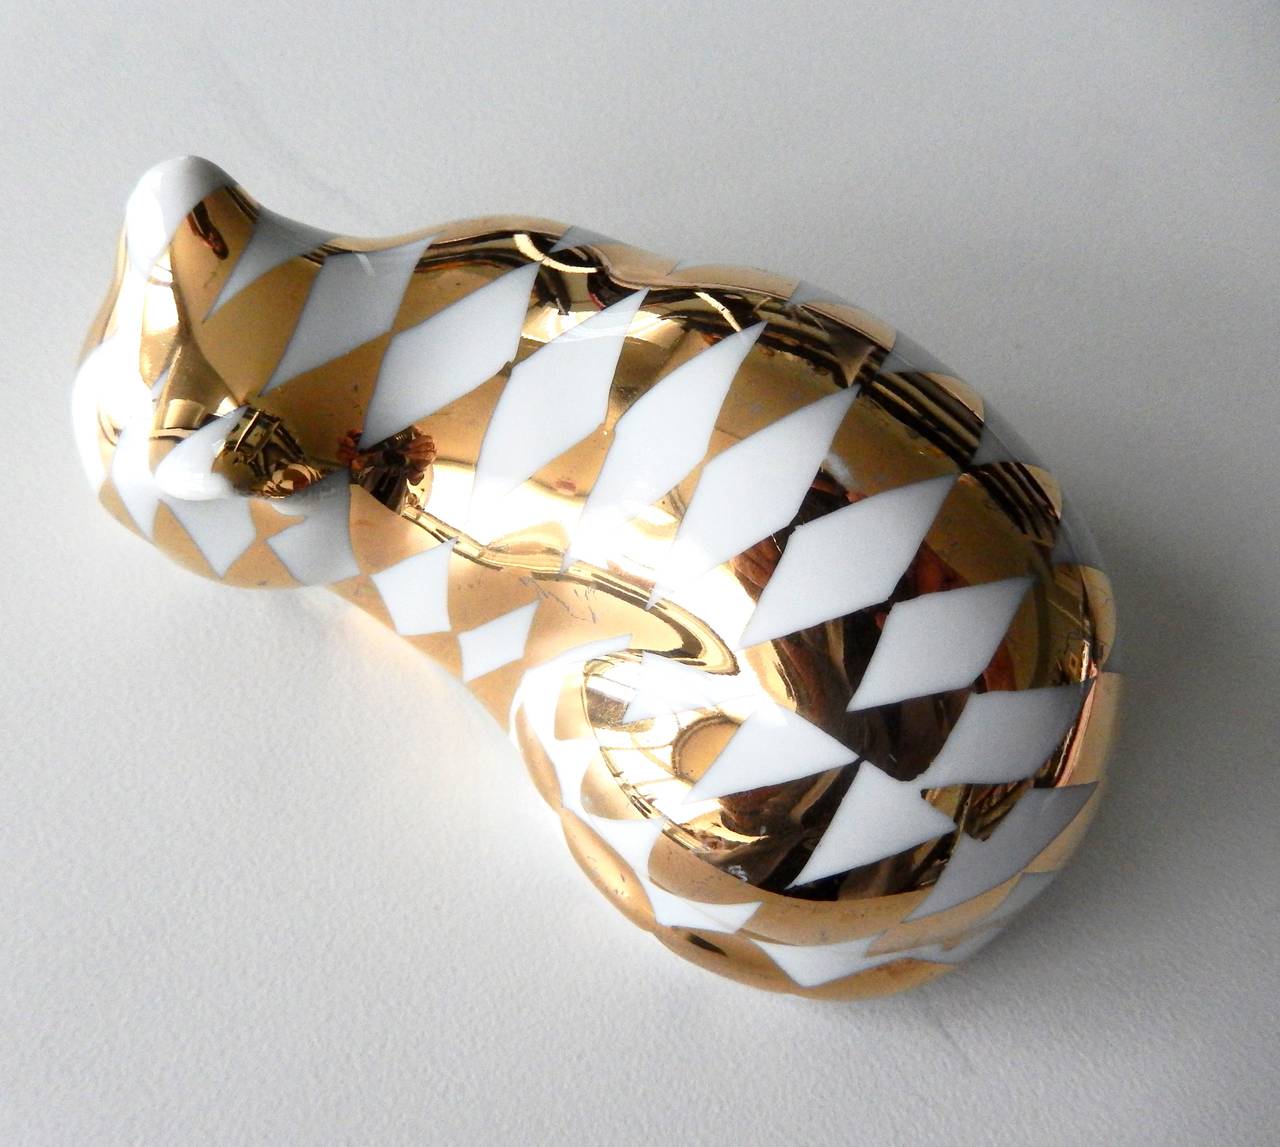 A sleeping ceramic cat figurine with a luxurious gold lustre harlequin pattern by Piero Fornasetti. Marked.